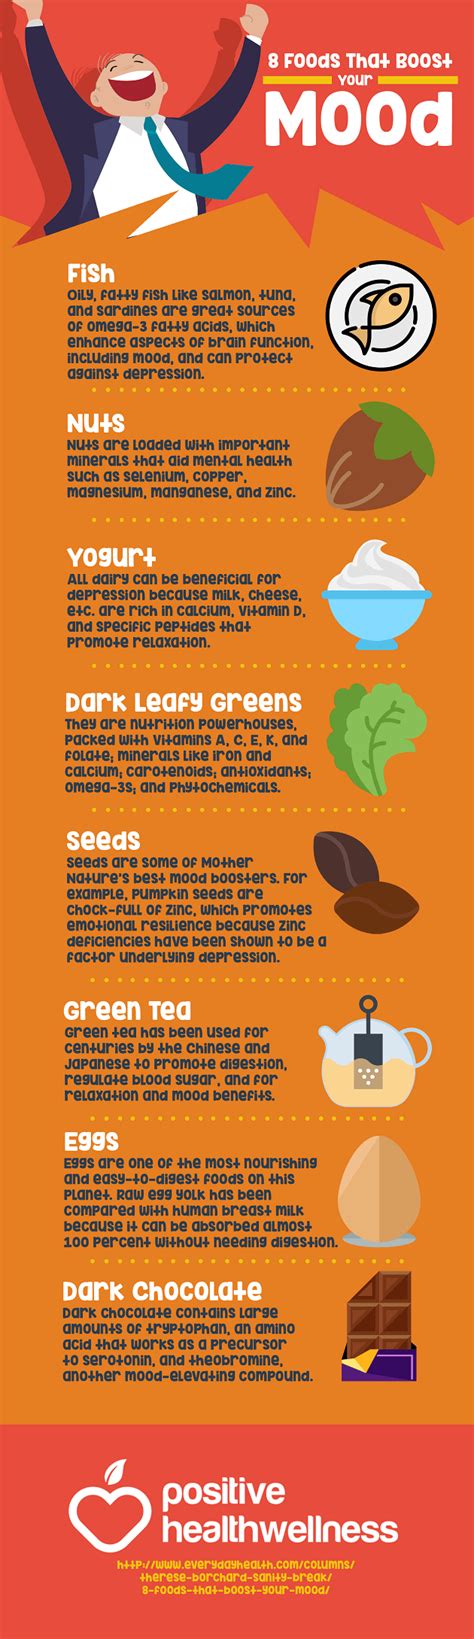 8 Foods That Boost Your Mood Infographic